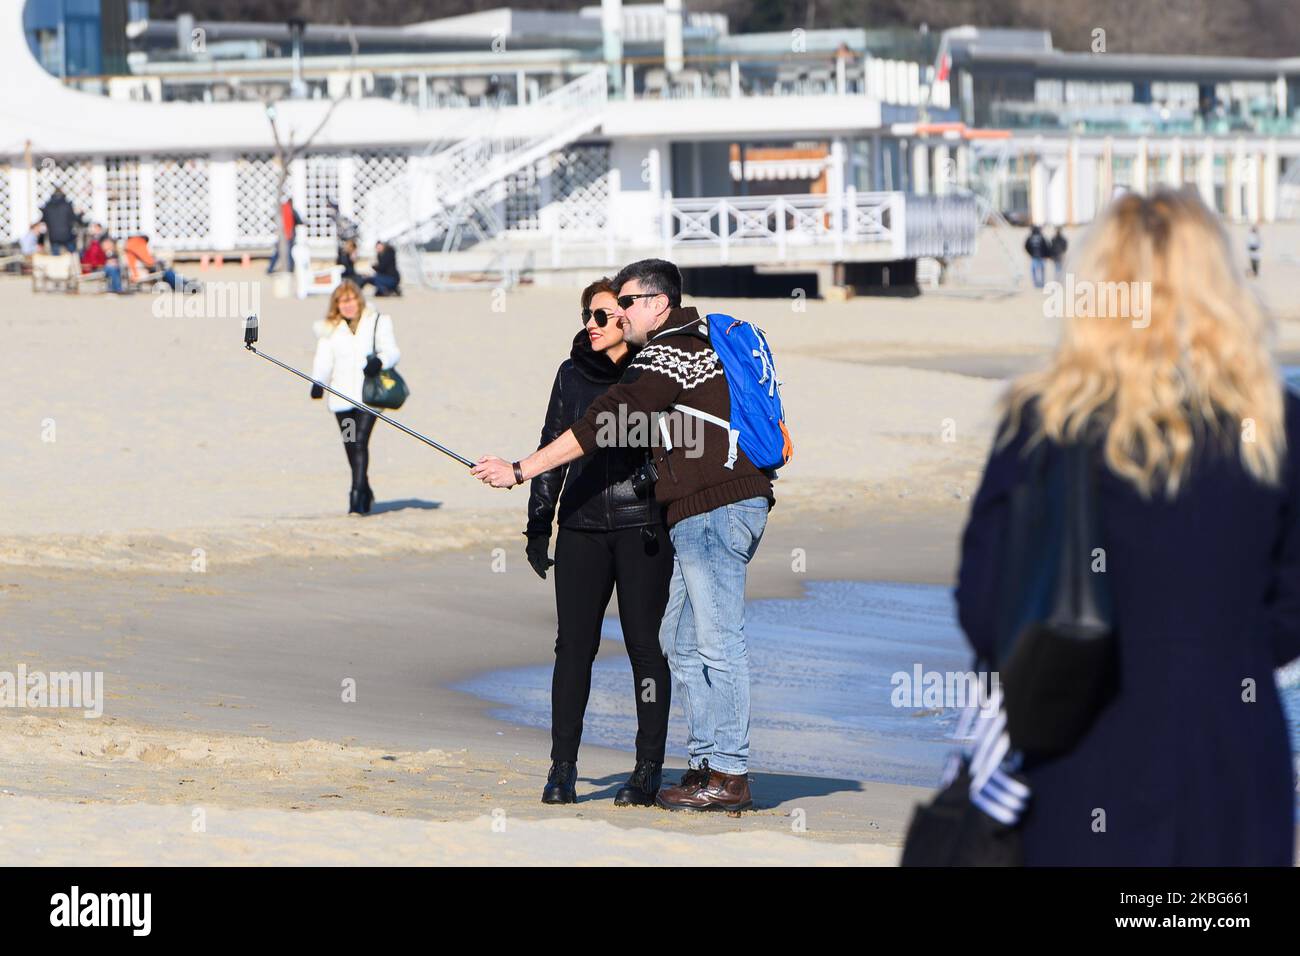 Bulgaria Winter High Temperature Record Broken Bulgarians enjoy themselves on a sunny winter day at the Varna beach, some 450 km to the East of the Bulgarian capital Sofia, on Feb. 3, 2020. Temperatures of the are expected to soar at 20 degrees in Celsius (68 in Fahrenheit). A more then 50 years' high temperature record was broken on Feb 2, as the temperature reached 19 degrees in Celsius (some 66 in Fahrenheit). The weather is supposed to be unusually warm for the next 3-4 days. (Photo by Petko Momchilov/Impact Press GroupNurPhoto) Stock Photo